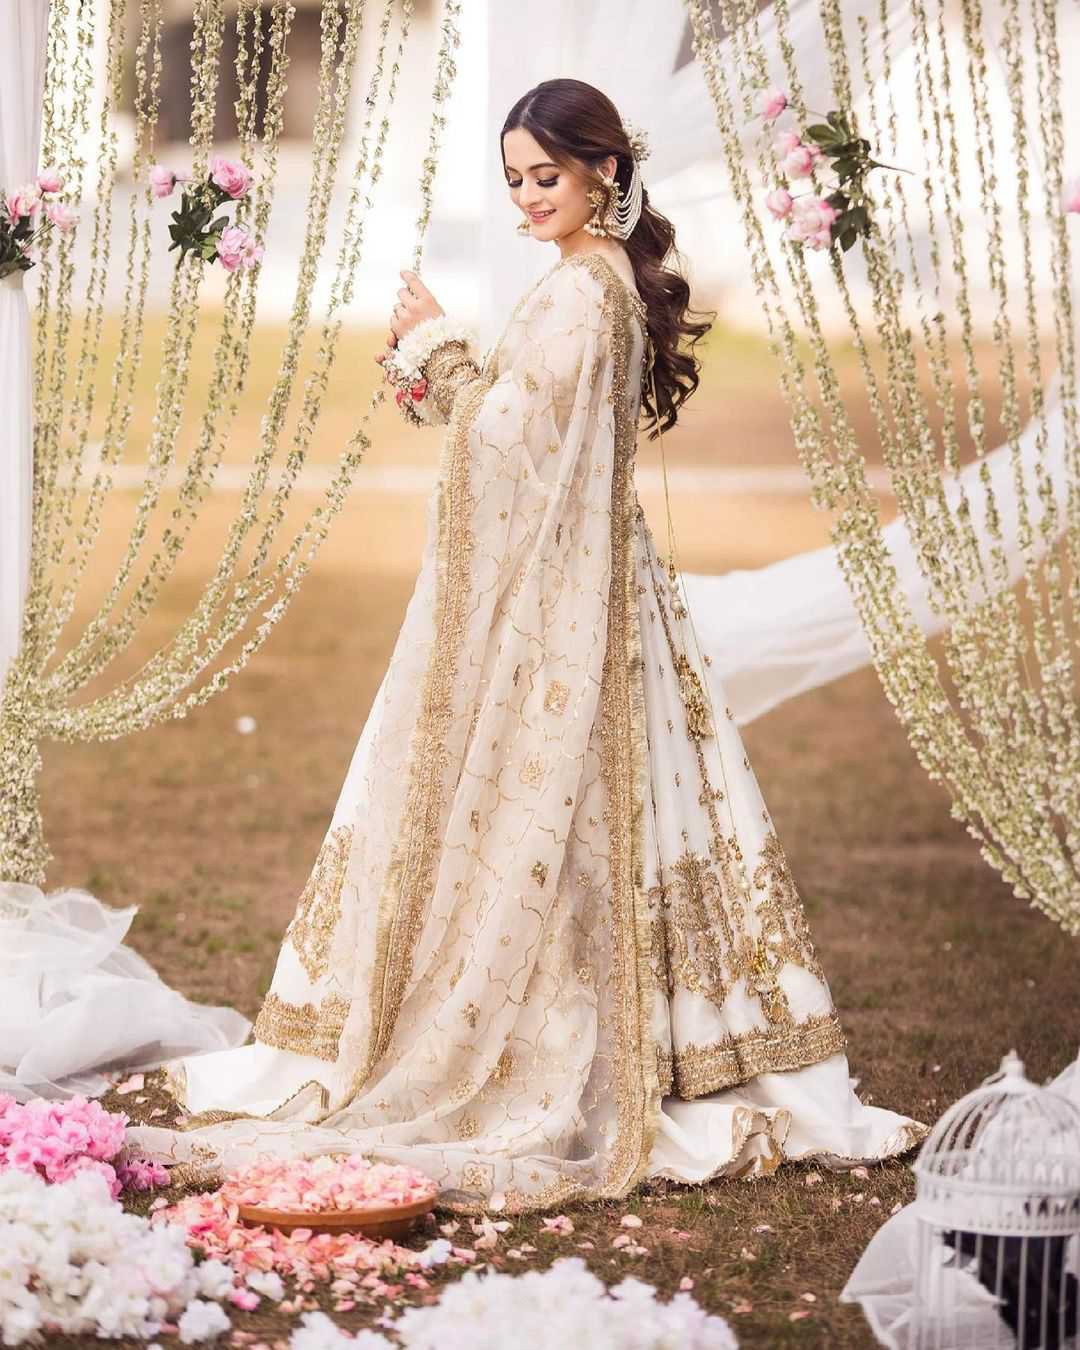 Aiman Khan Looks Stunning In Her Recent Bridal Photoshoot